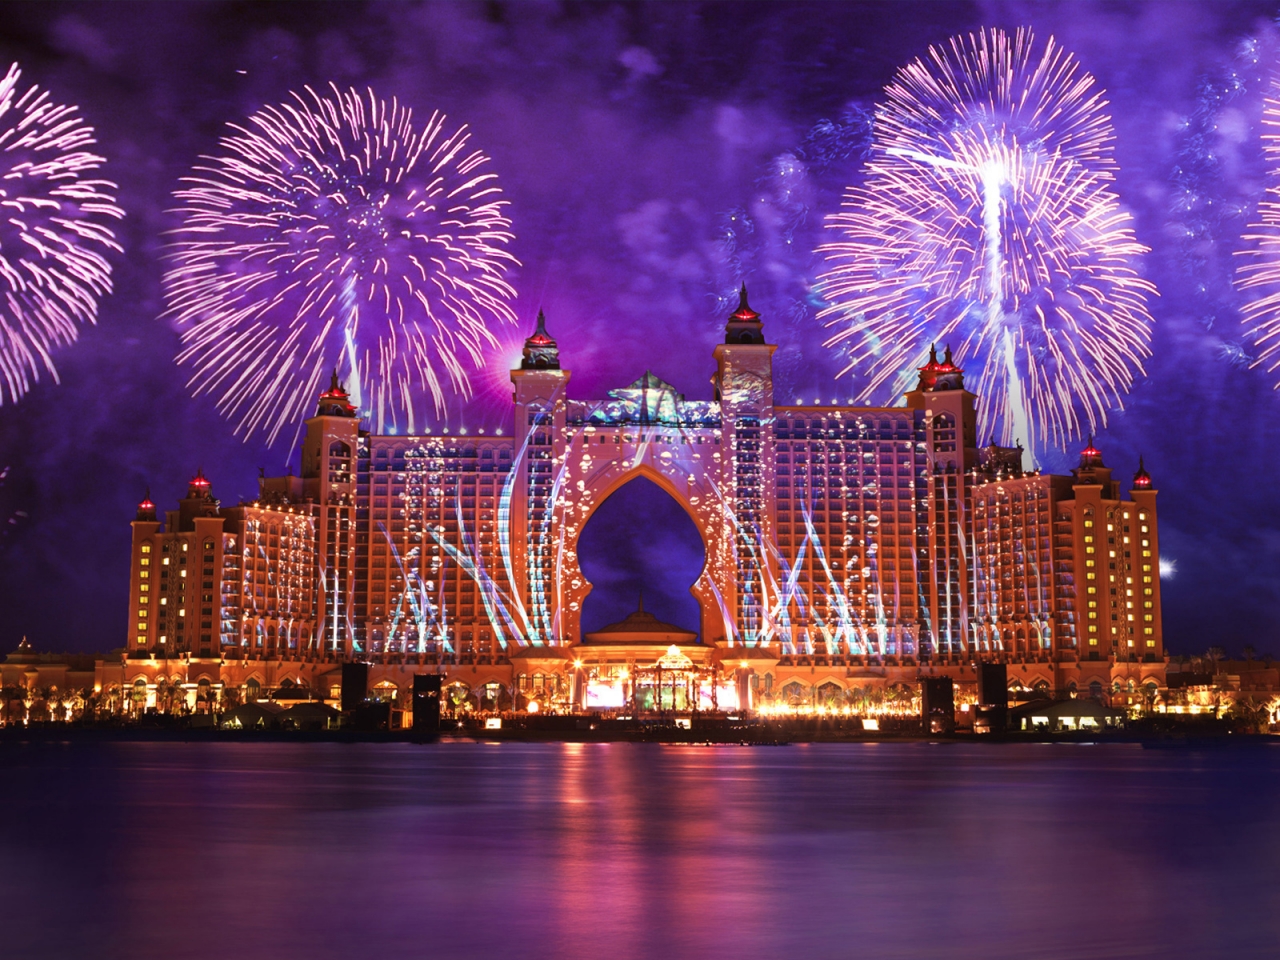 Atlantis The Palm Hotel for 1280 x 960 resolution